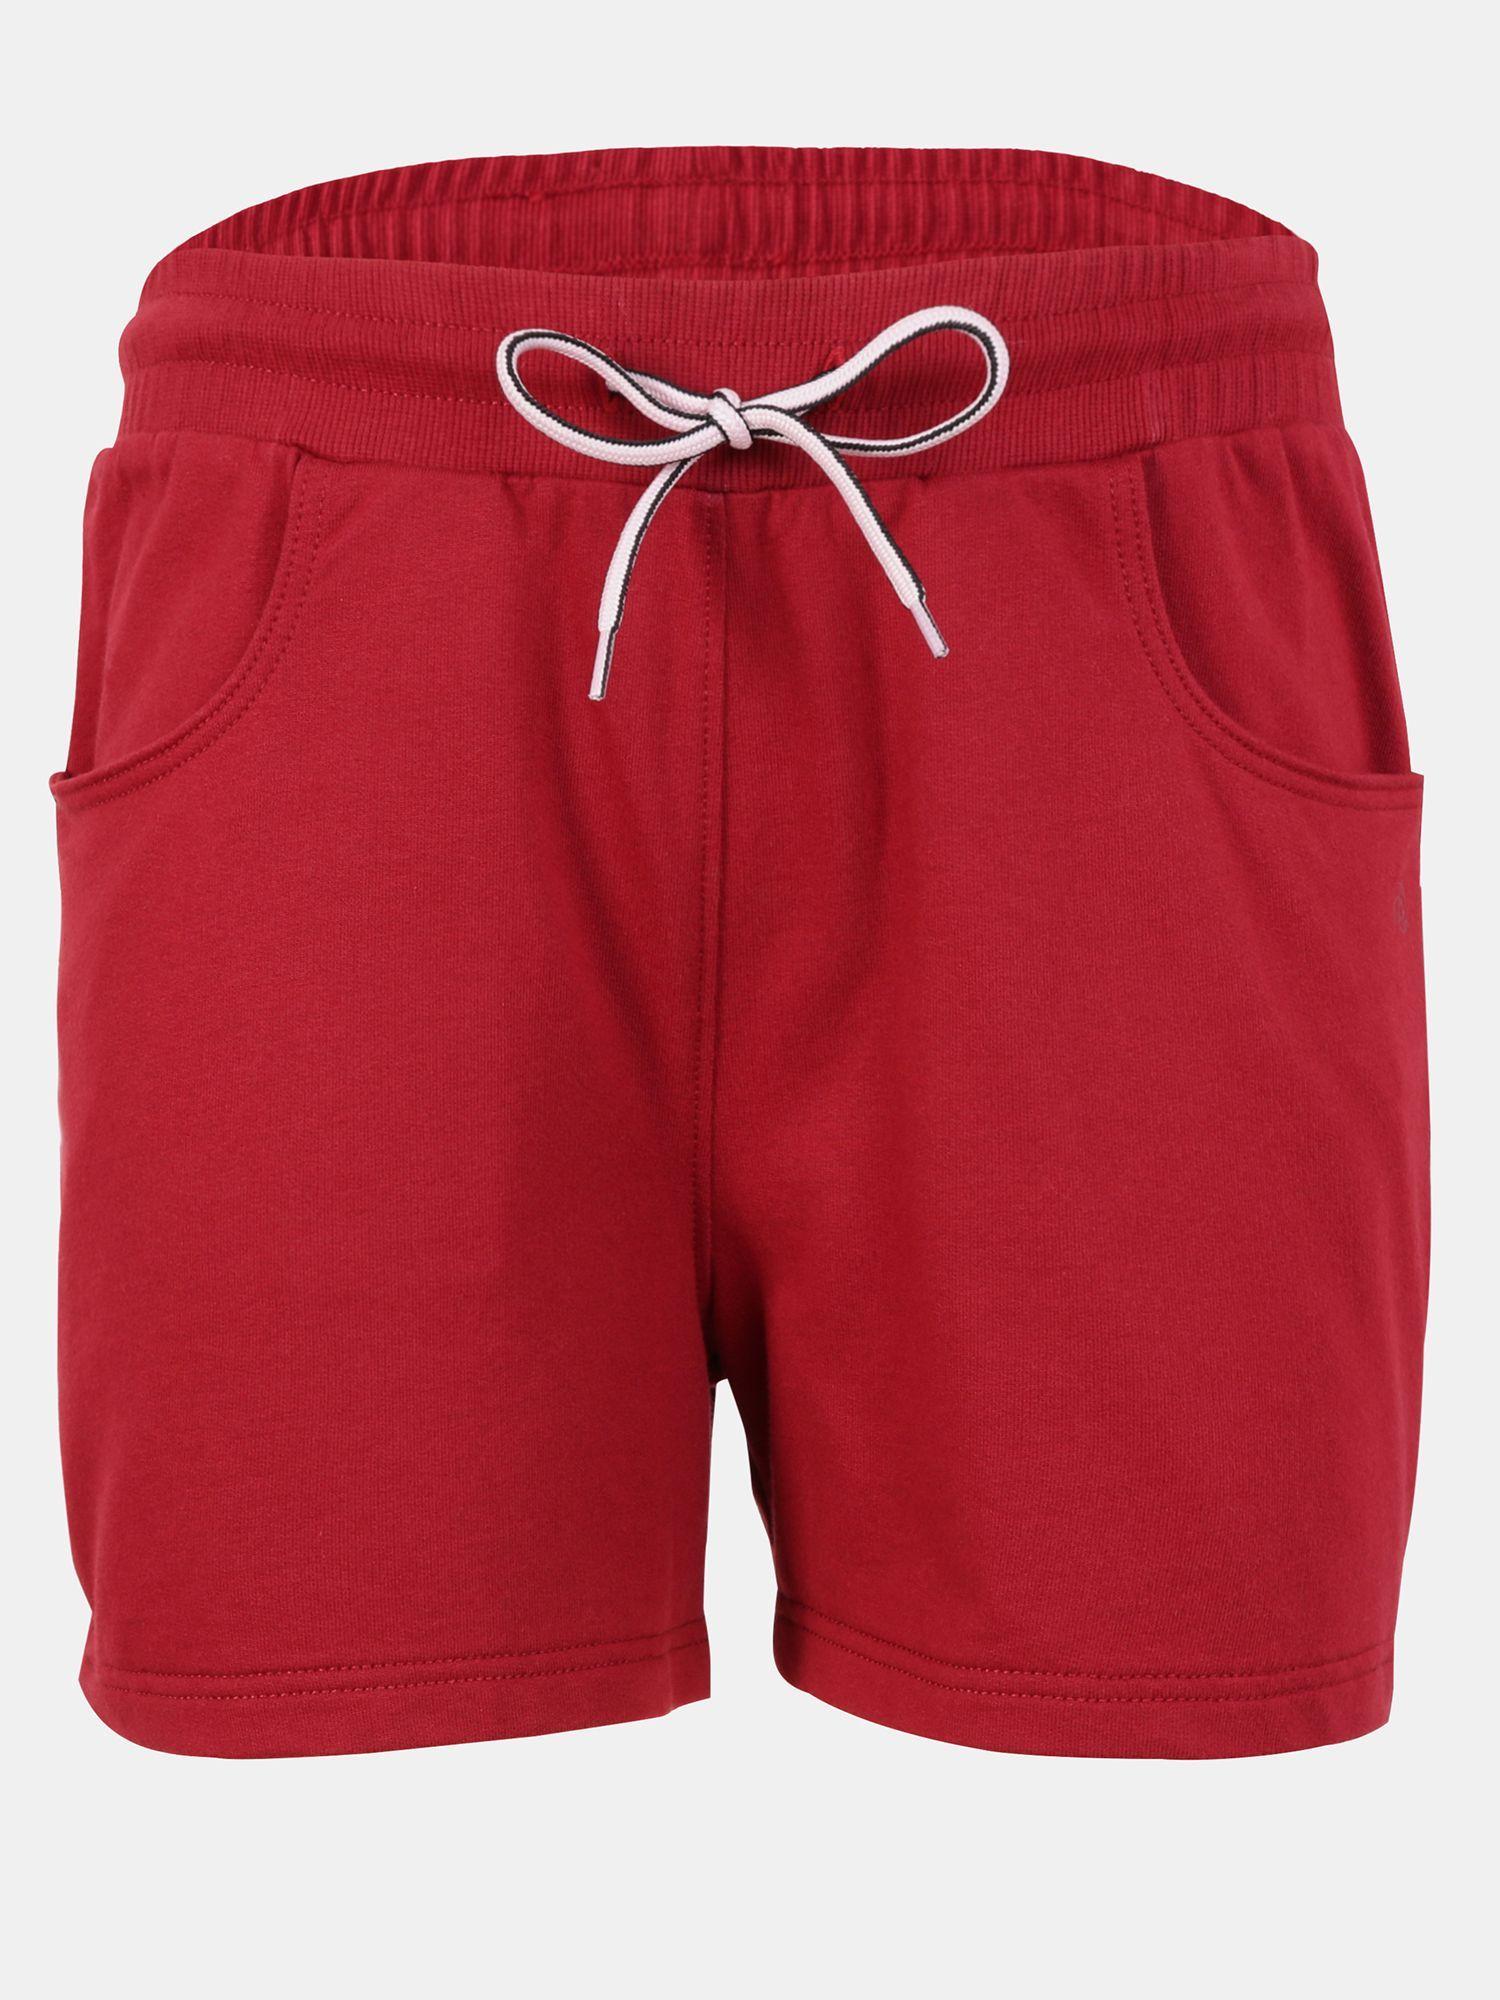 jockey ag04 cotton shorts for girls with front pocket & drawstring closure-red